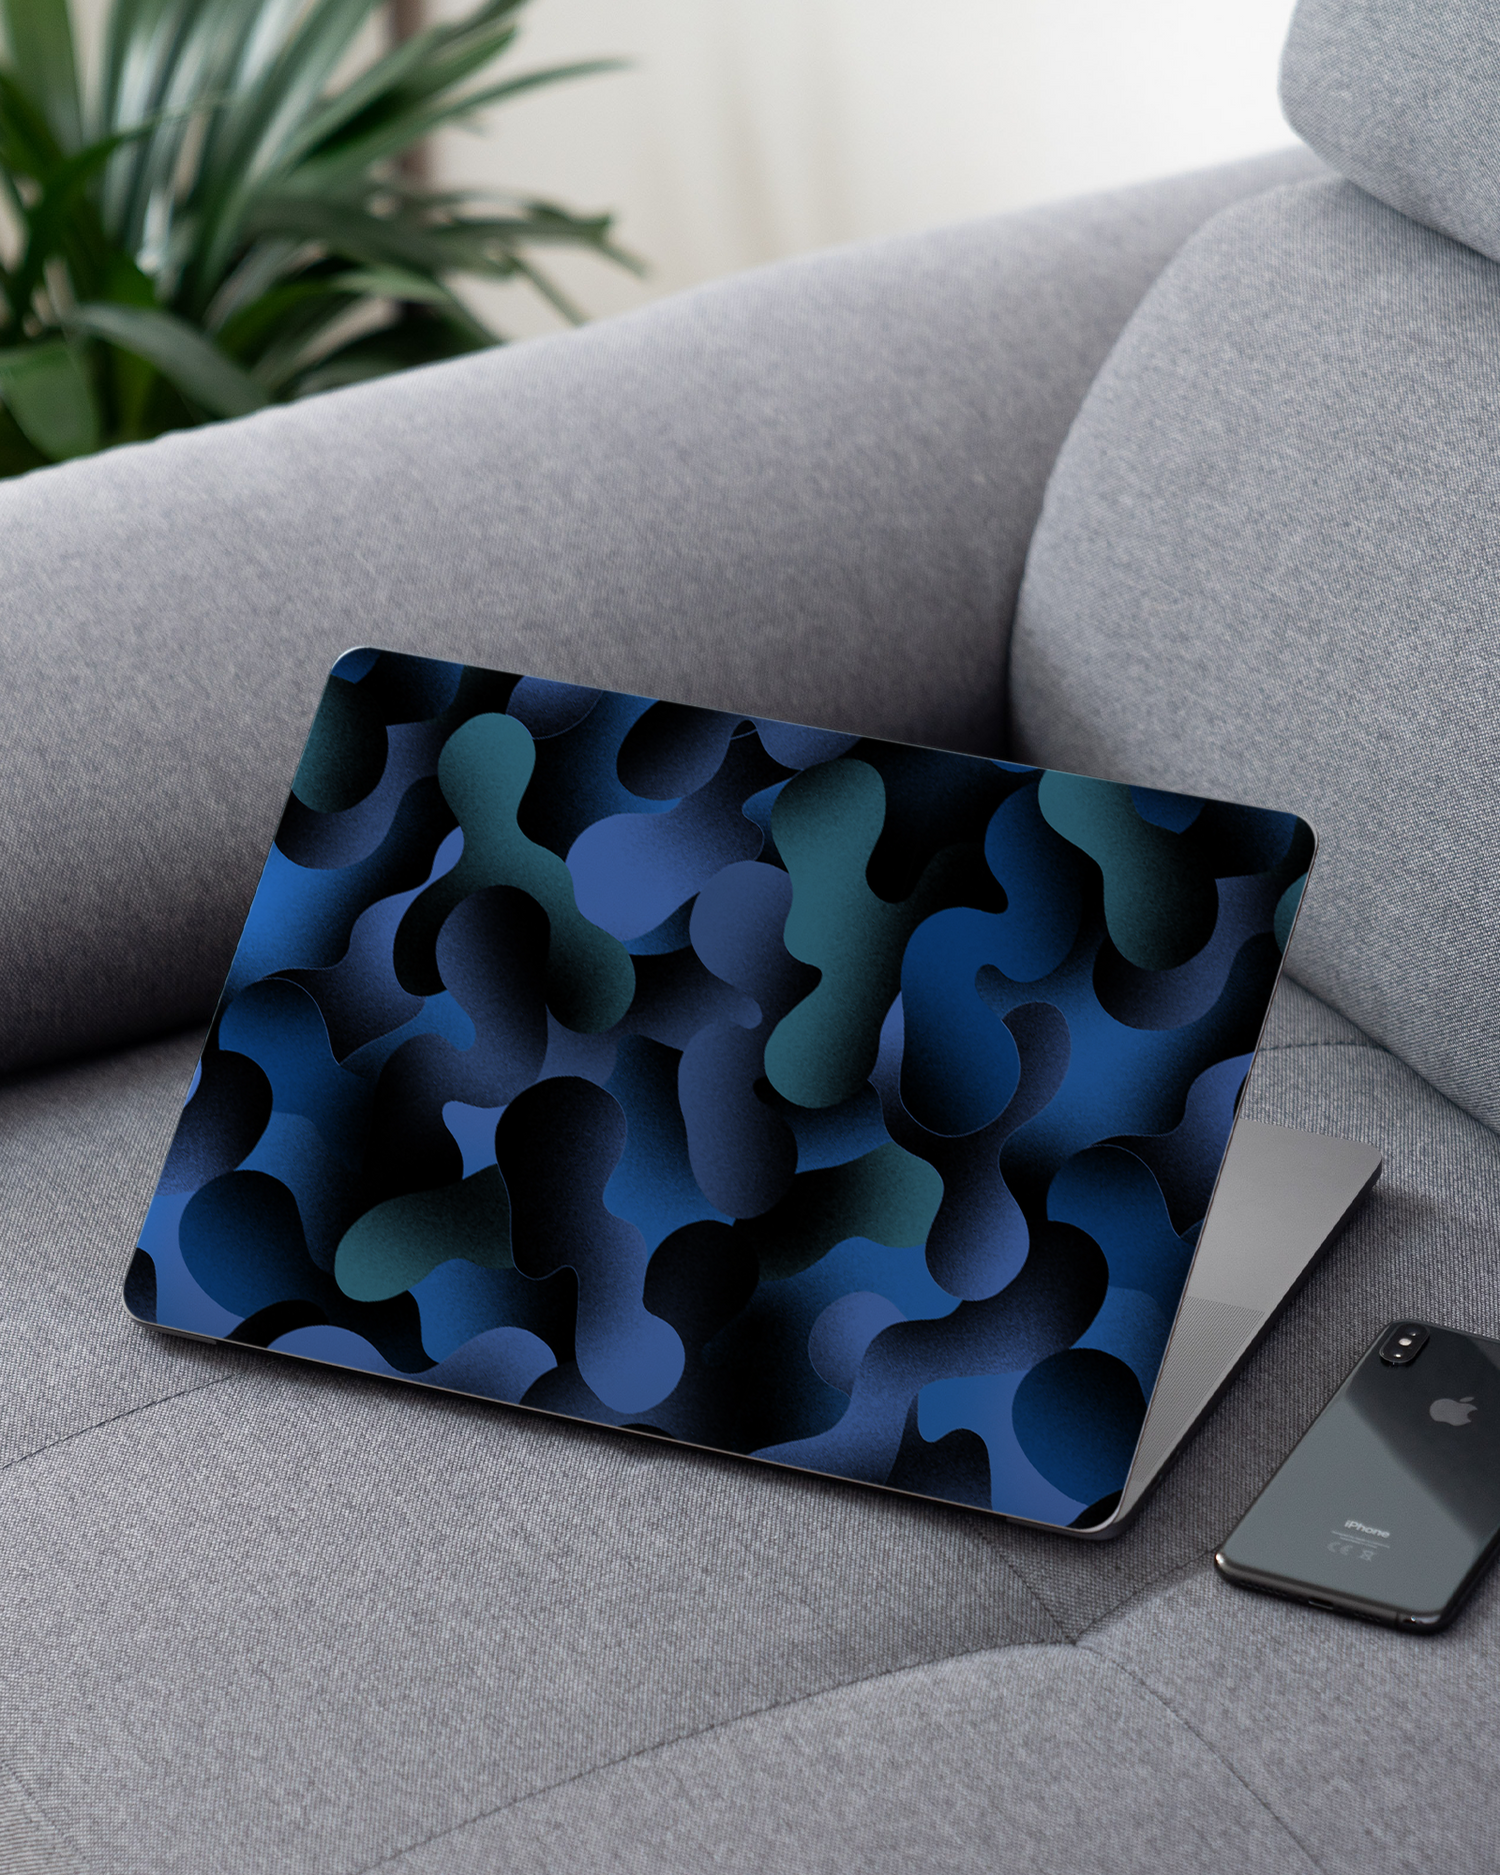 Night Moves Laptop Skin for 13 inch Apple MacBooks on a couch